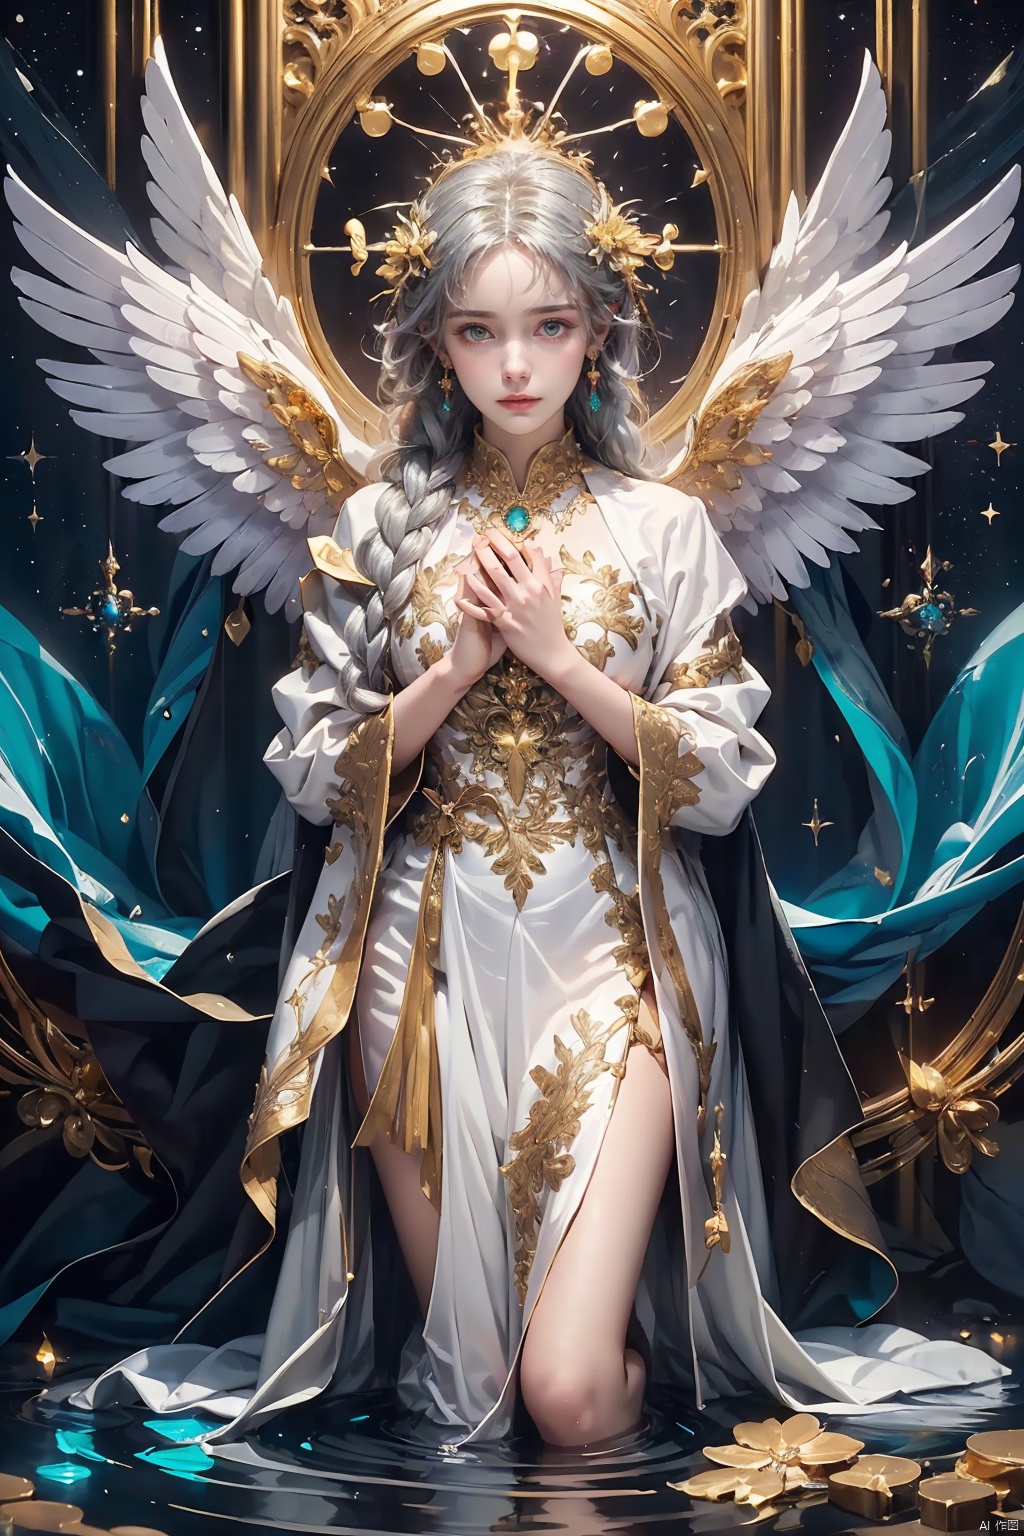 (((dark, emerald, gold)), rich palette, high contrast, deep shadows, luxurious aesthetic, supreme detail, breathtaking artwork, (masterpiece), (epic composition), (hyper-realistic), (((oil painting))), ((an intricately captivating and hauntingly beautiful)), (dramatic chiaroscuro), 1angel, celestial theme, shattered stained glass window, ancient cathedral ruins, ((a trail of ethereal light)), ((cosmic aura)), the Andromeda galaxy, cosmic dust, Nebulae, Reflecting on holy water basin, (1angel:1.5) divine theme, silver-white wings, gazing downward, flowing white robes, parted lips, halo, volumetric lighting, full figure, angel emerging from broken glass, silver hair, intricate braids, serene expression, outstretched hand, holding a celestial staff, standing in water, looking towards viewer, detailed marble floor, male cherub, curly hair, kneeling in adoration, background with swirling galaxies, vast universe, epic scale, celestial choir, hymn,)))